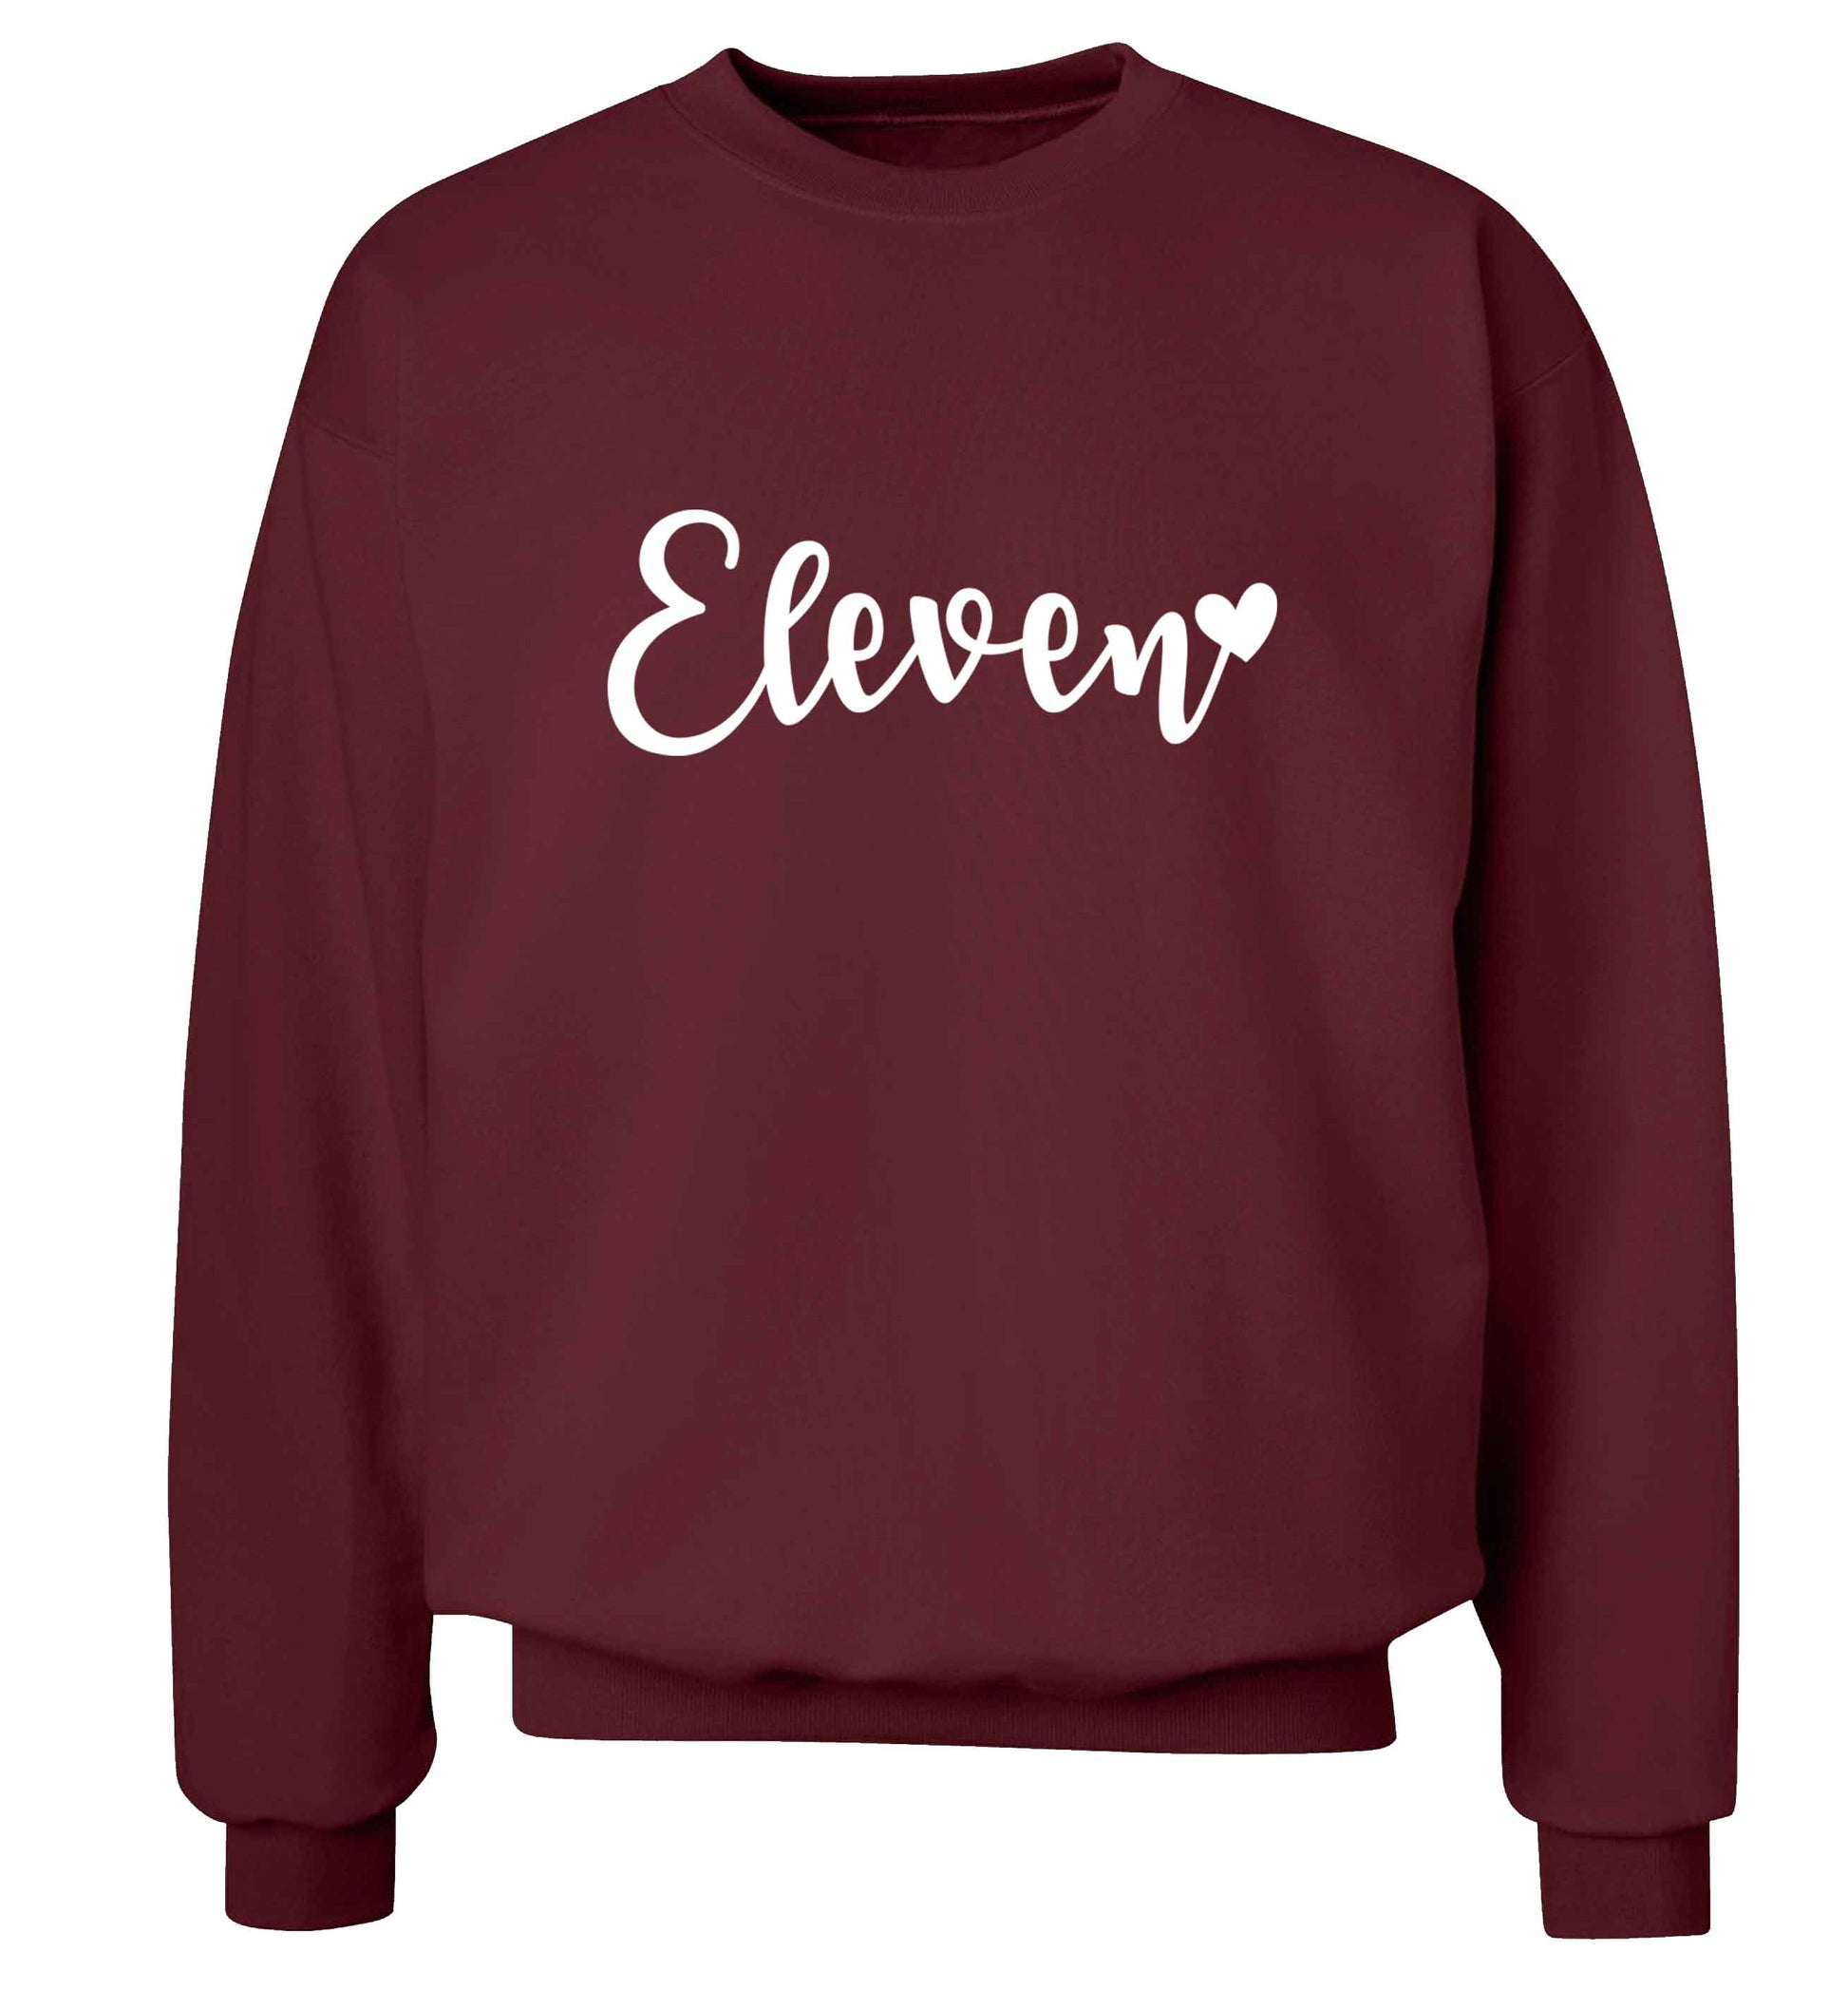 Eleven and heart! adult's unisex maroon sweater 2XL